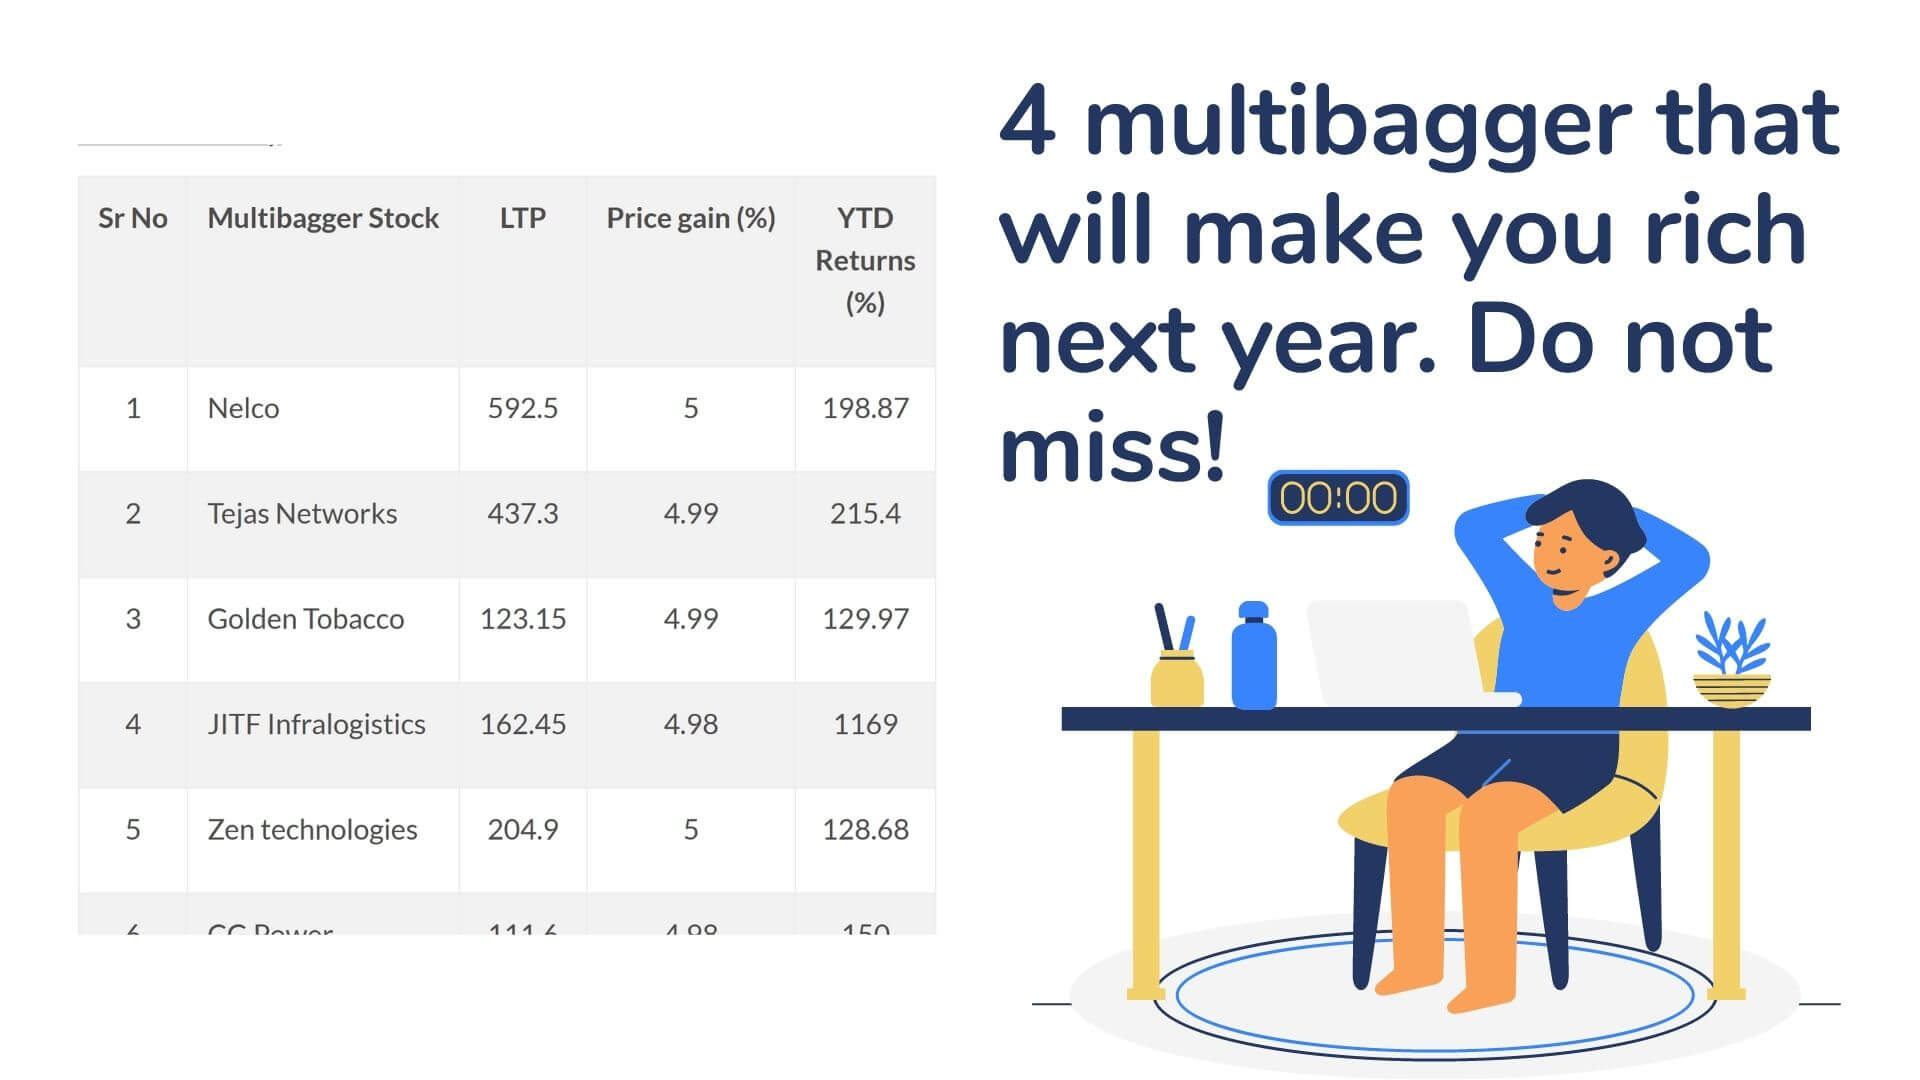 4 multibagger that will make you rich next year. Do not miss!